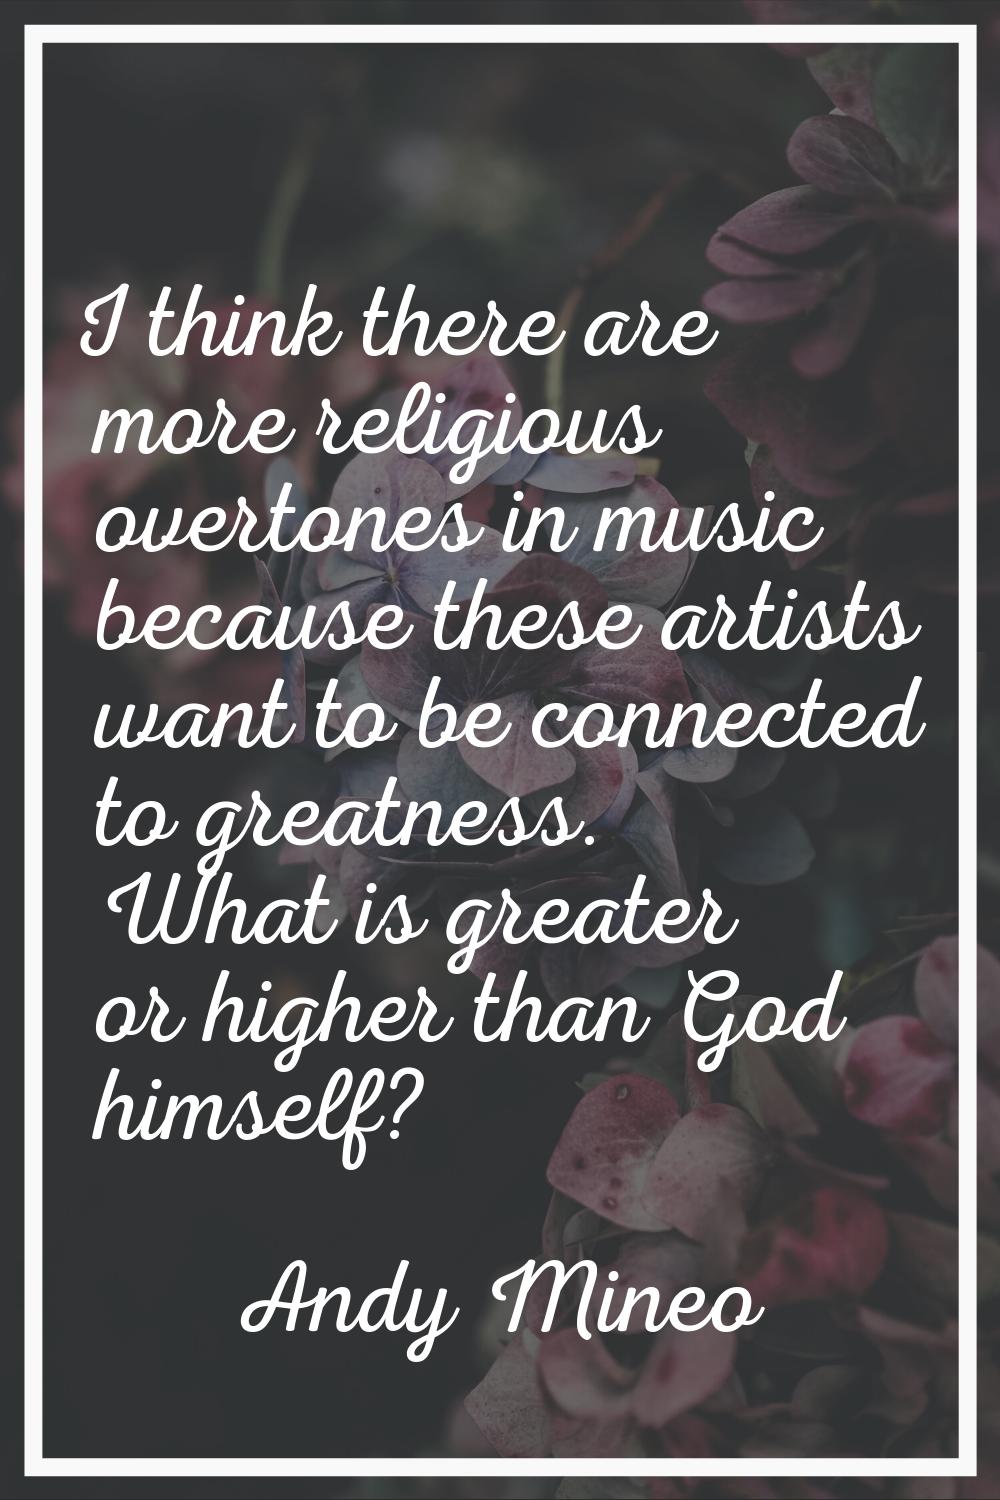 I think there are more religious overtones in music because these artists want to be connected to g